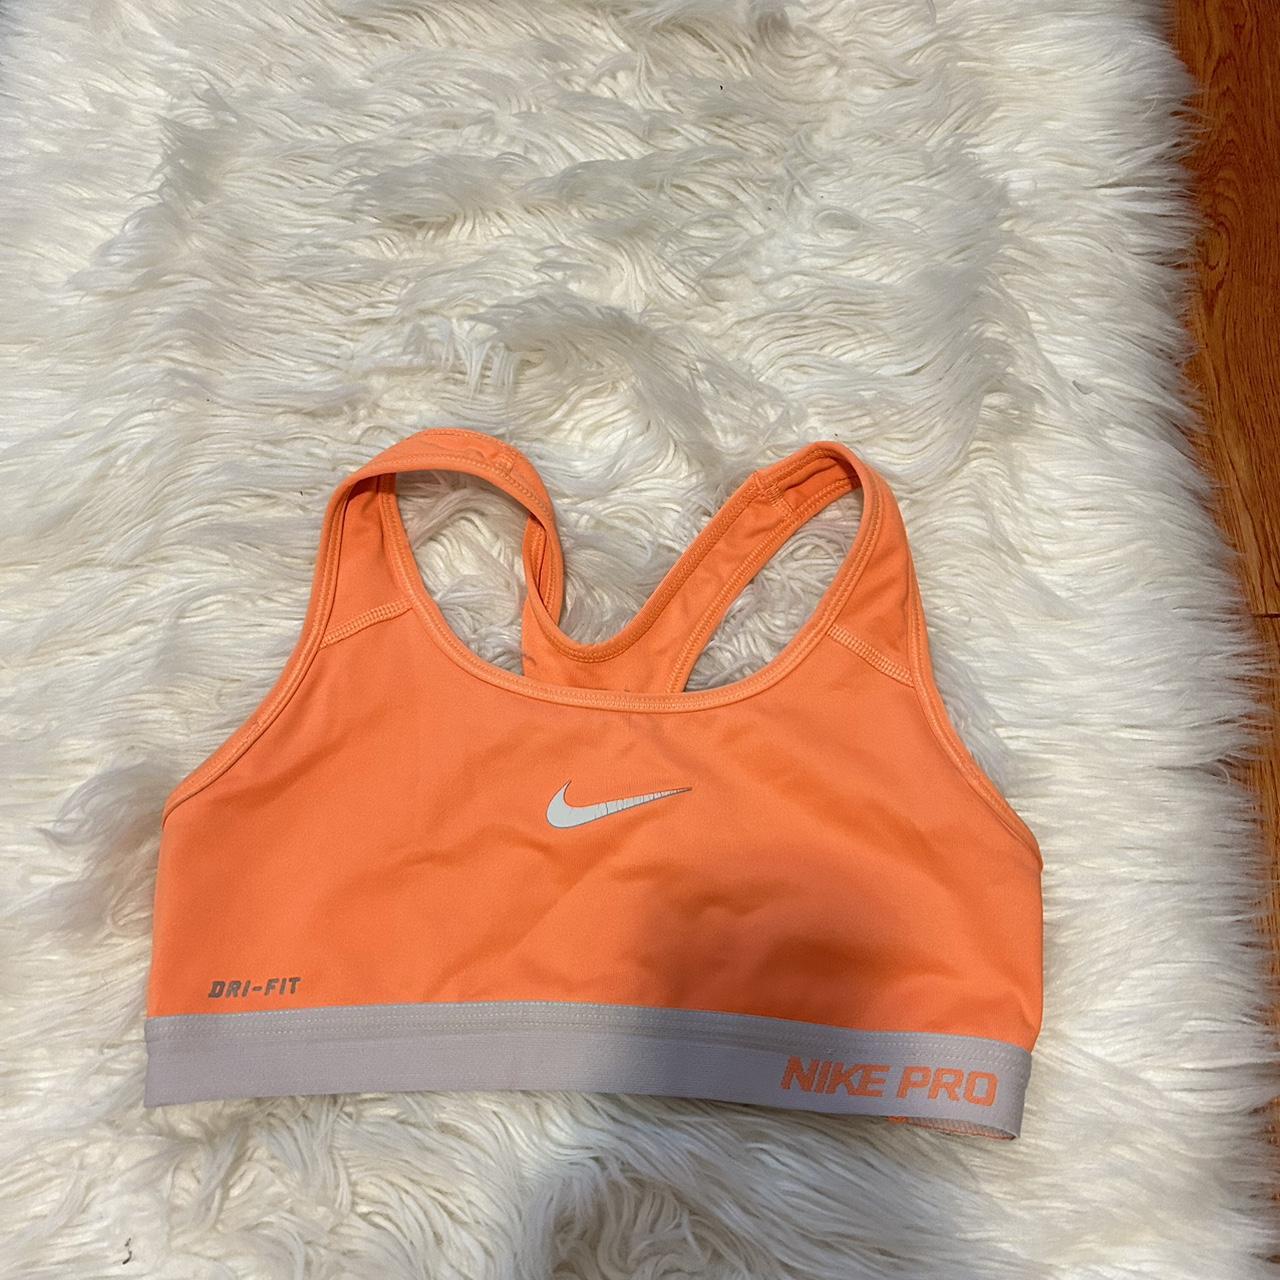 Nike Sports Bras for sale in Orange, New South Wales, Facebook Marketplace